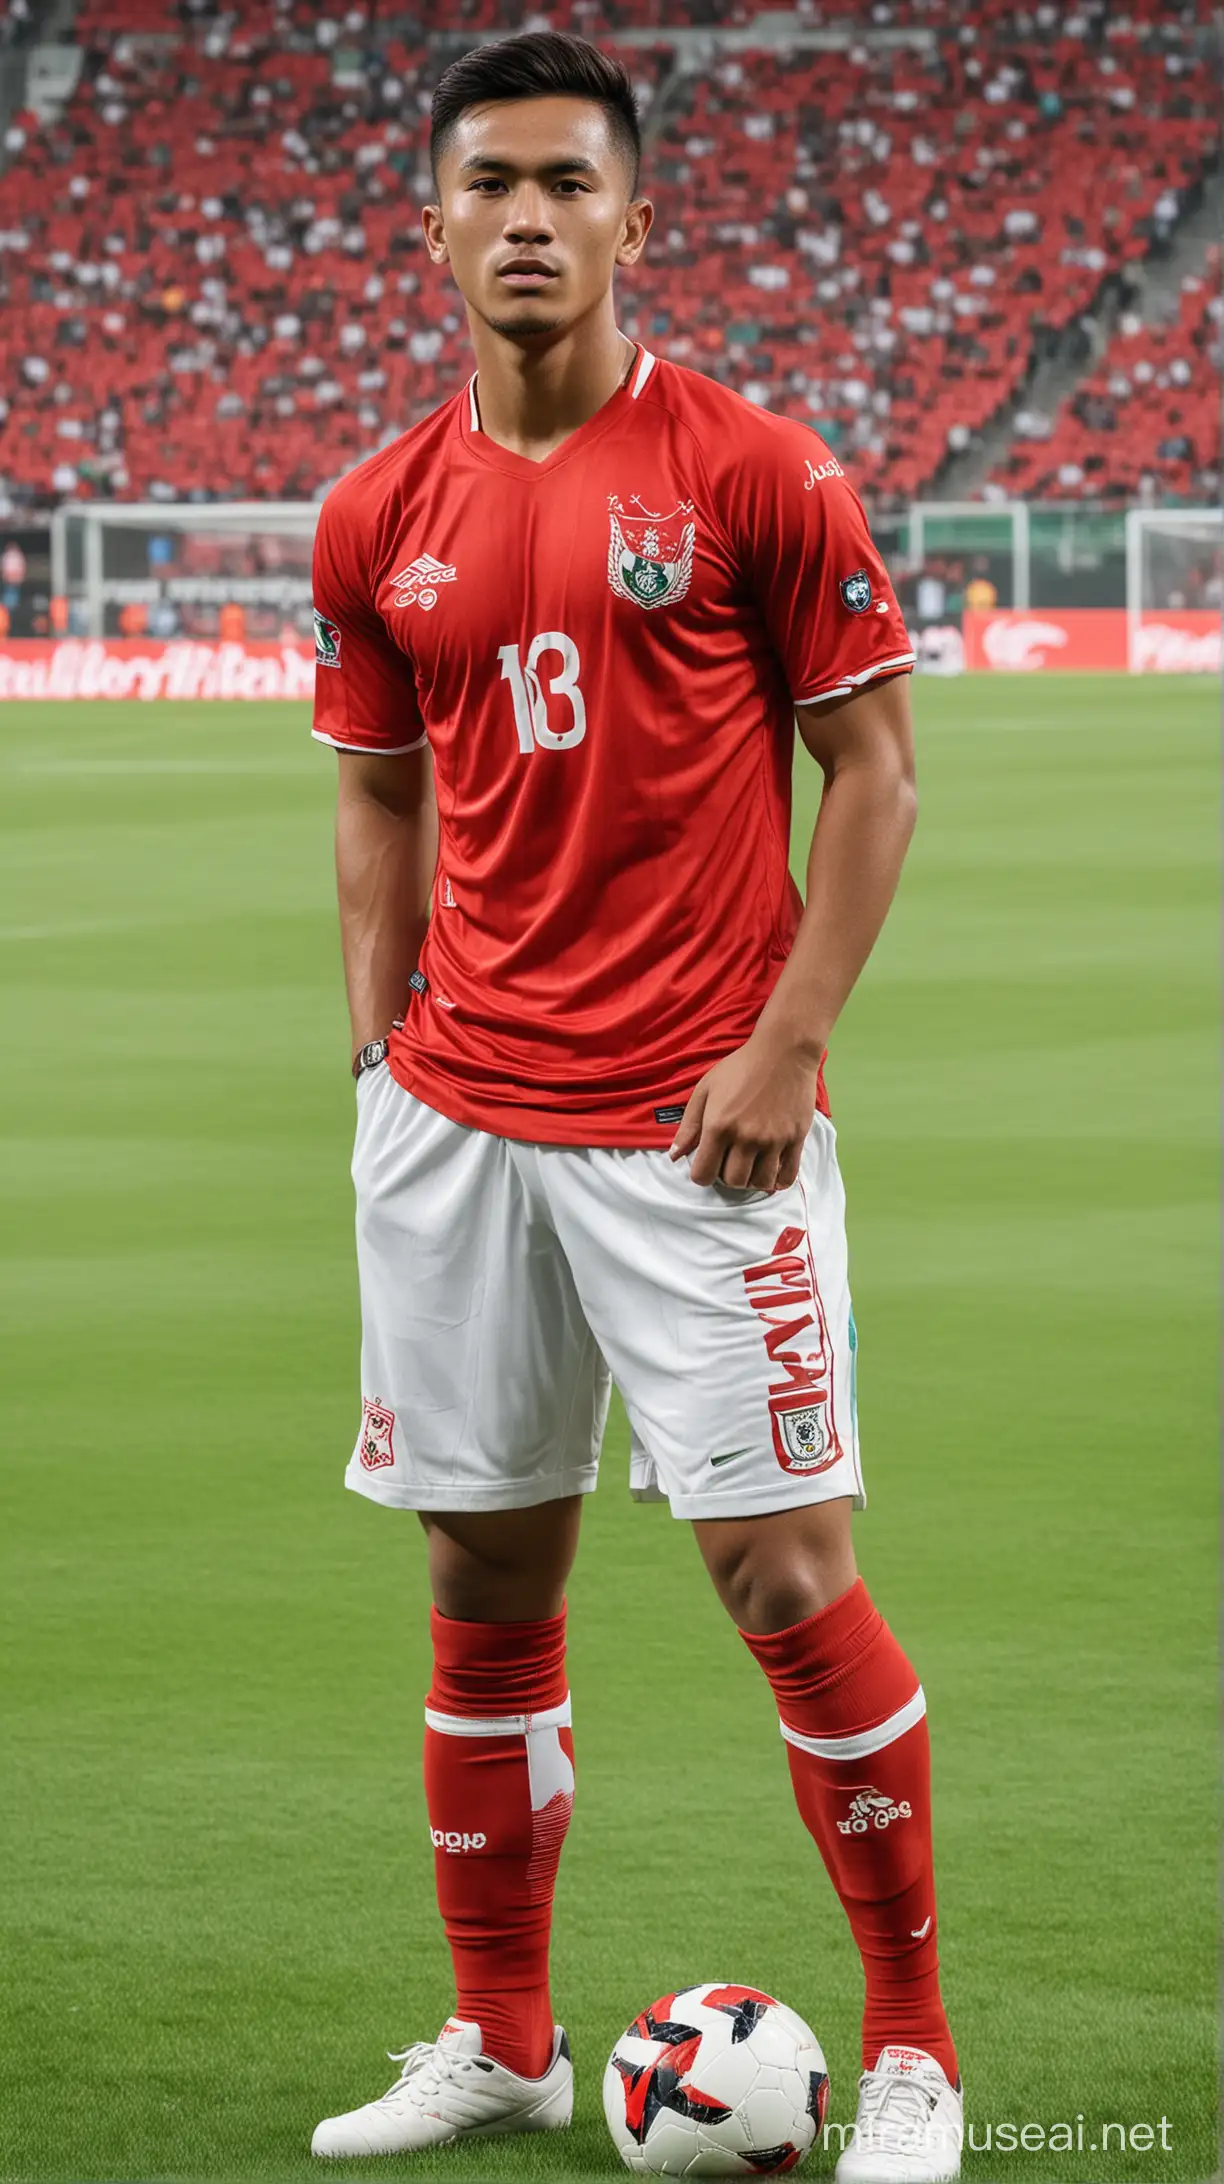 Indonesian Footballer,wearing timnas indonesian jersey shirt,20 years old,european face, handsome, full muscle, nathan tjoe a on face, full body, in the GBK Stadion with garuda background